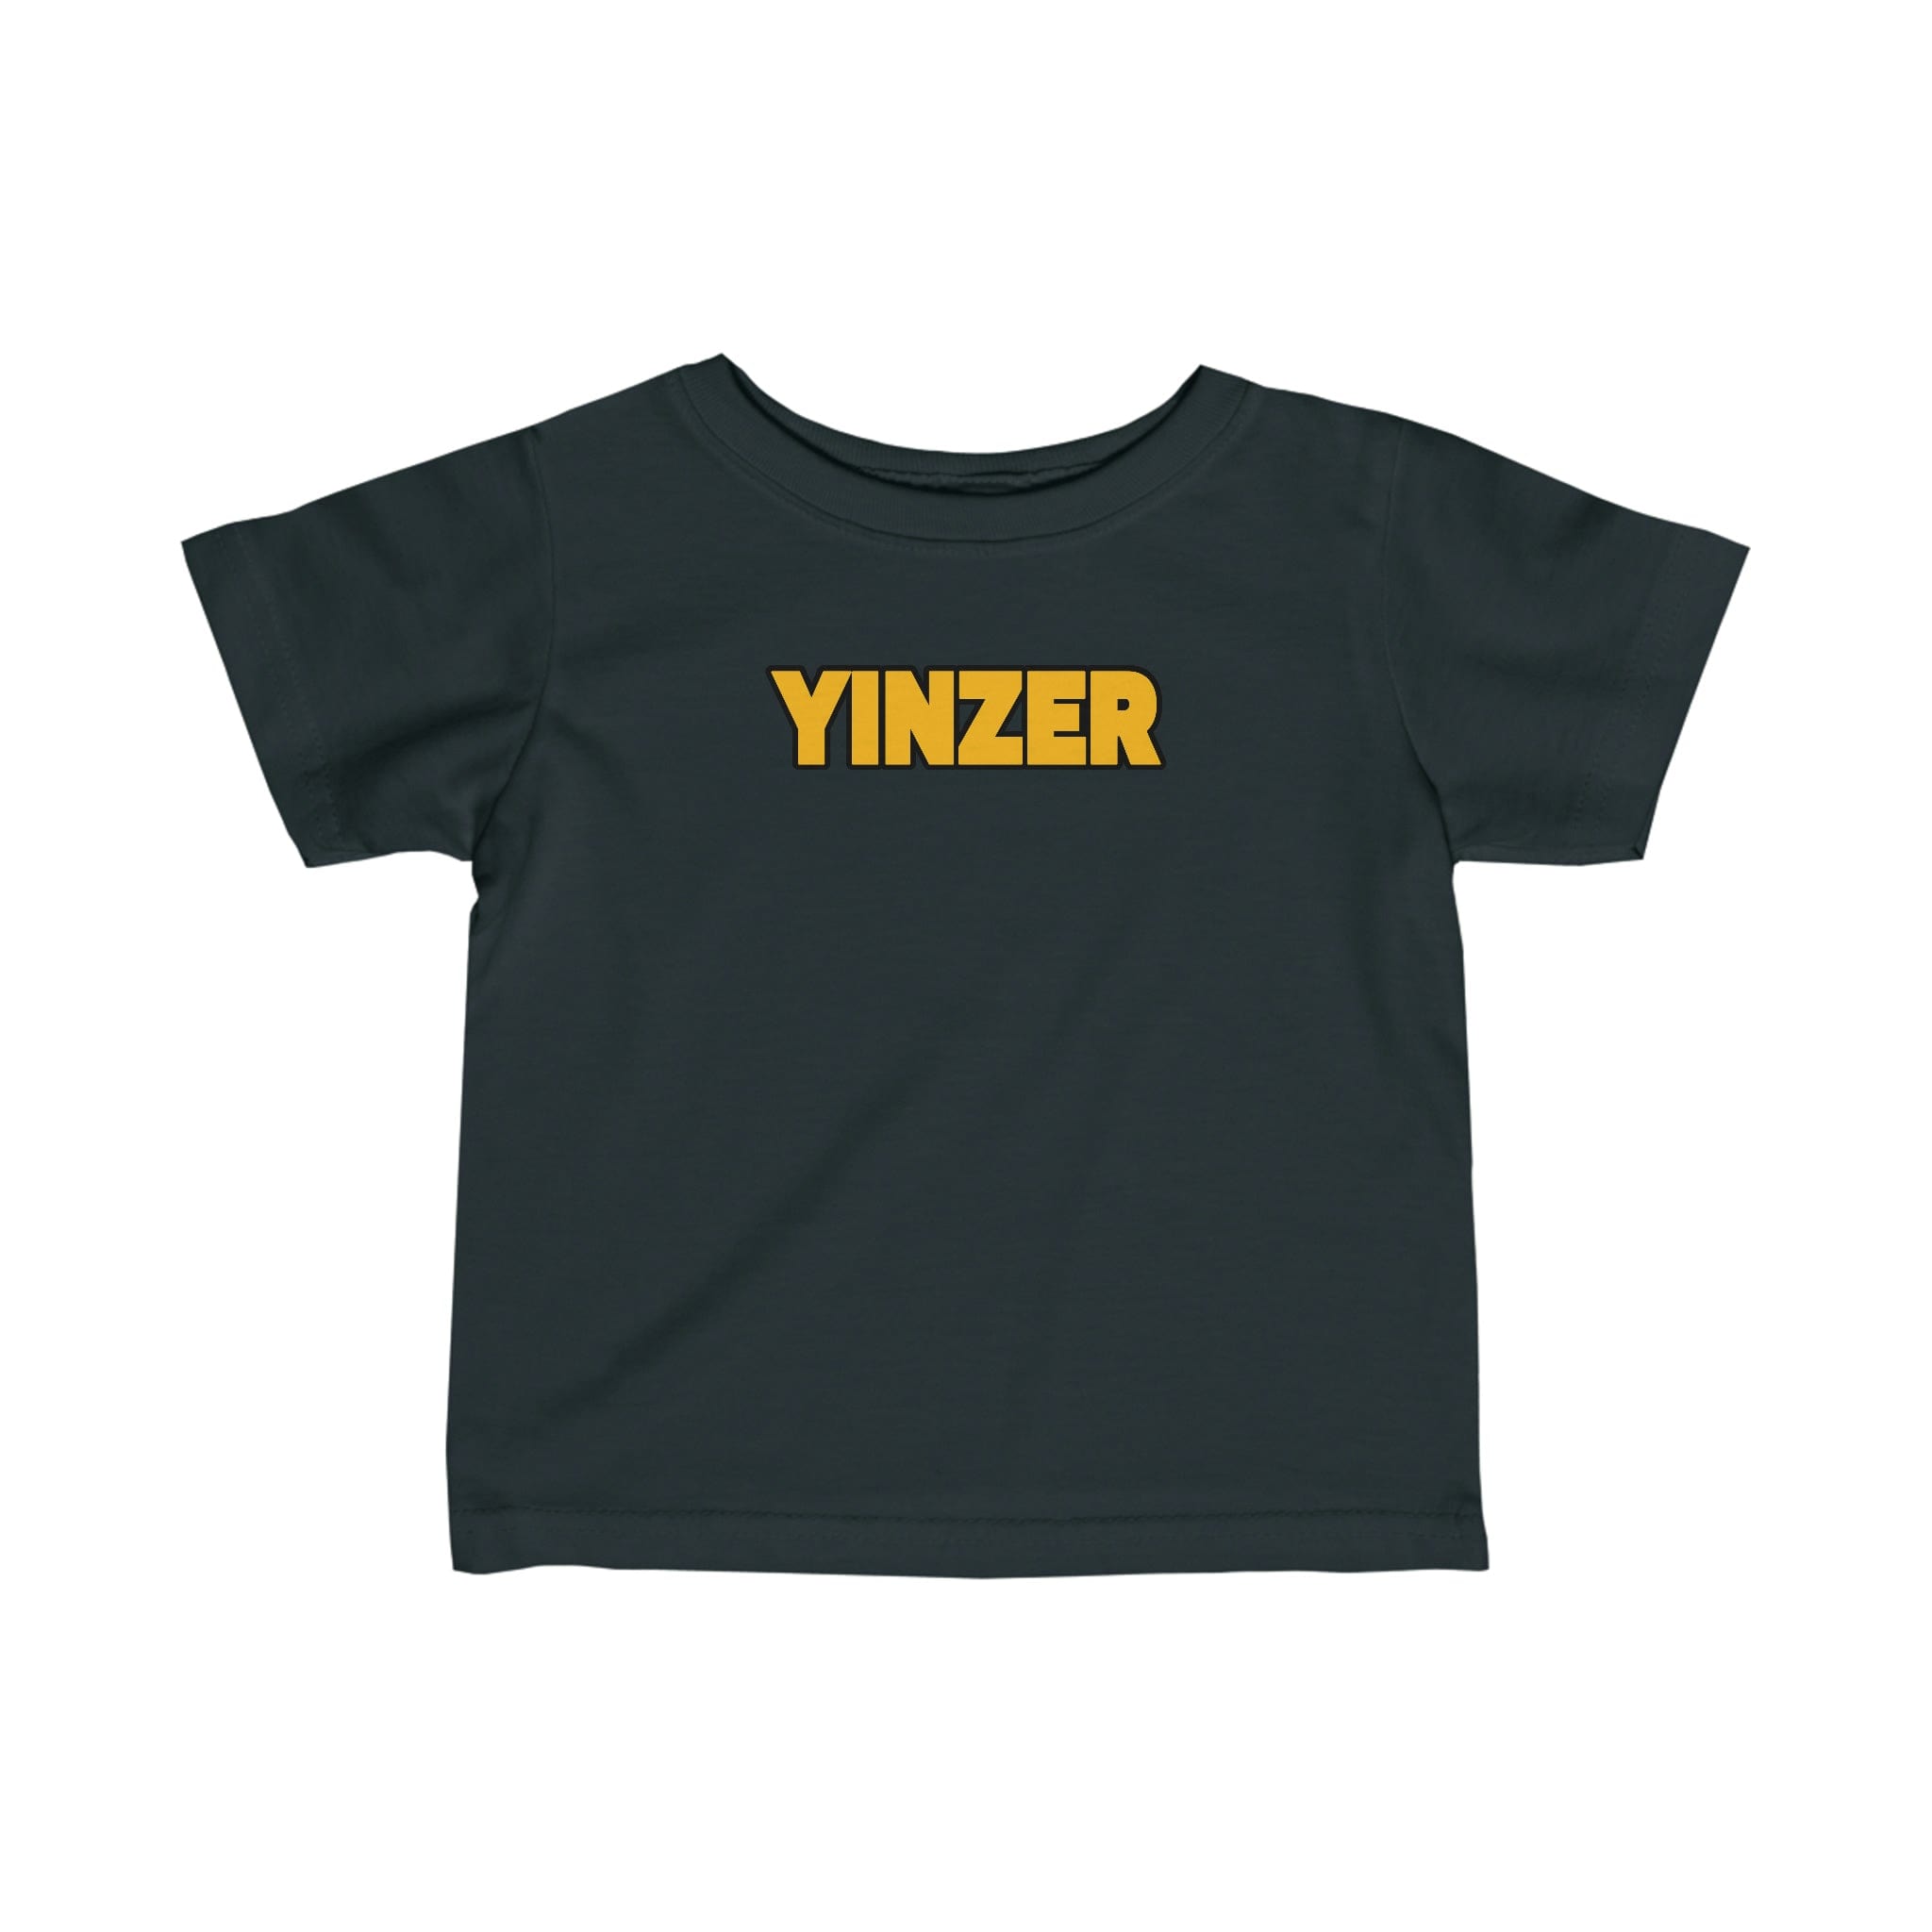 Kids collection of Youth T-shirts with Pittsburgh images & sayings Collection